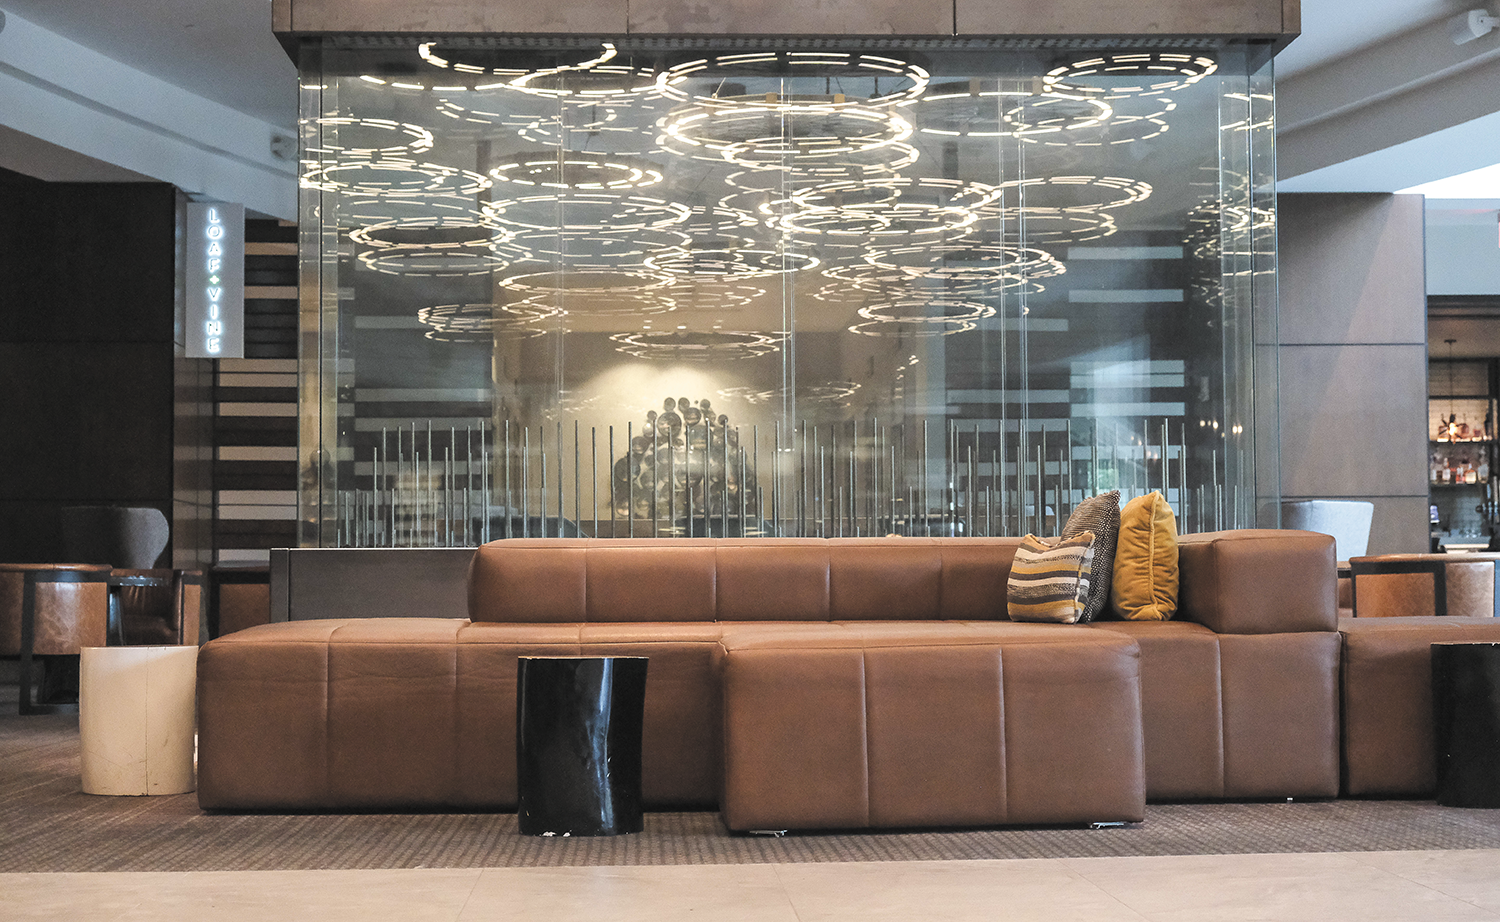 Photograph of an upscale hotel lobby with a light brown leather low back sectional in the foreground. A large panel of glass behind the sofa reflects many overlapping circles of light from a large hanging lighting installation behind the camera.